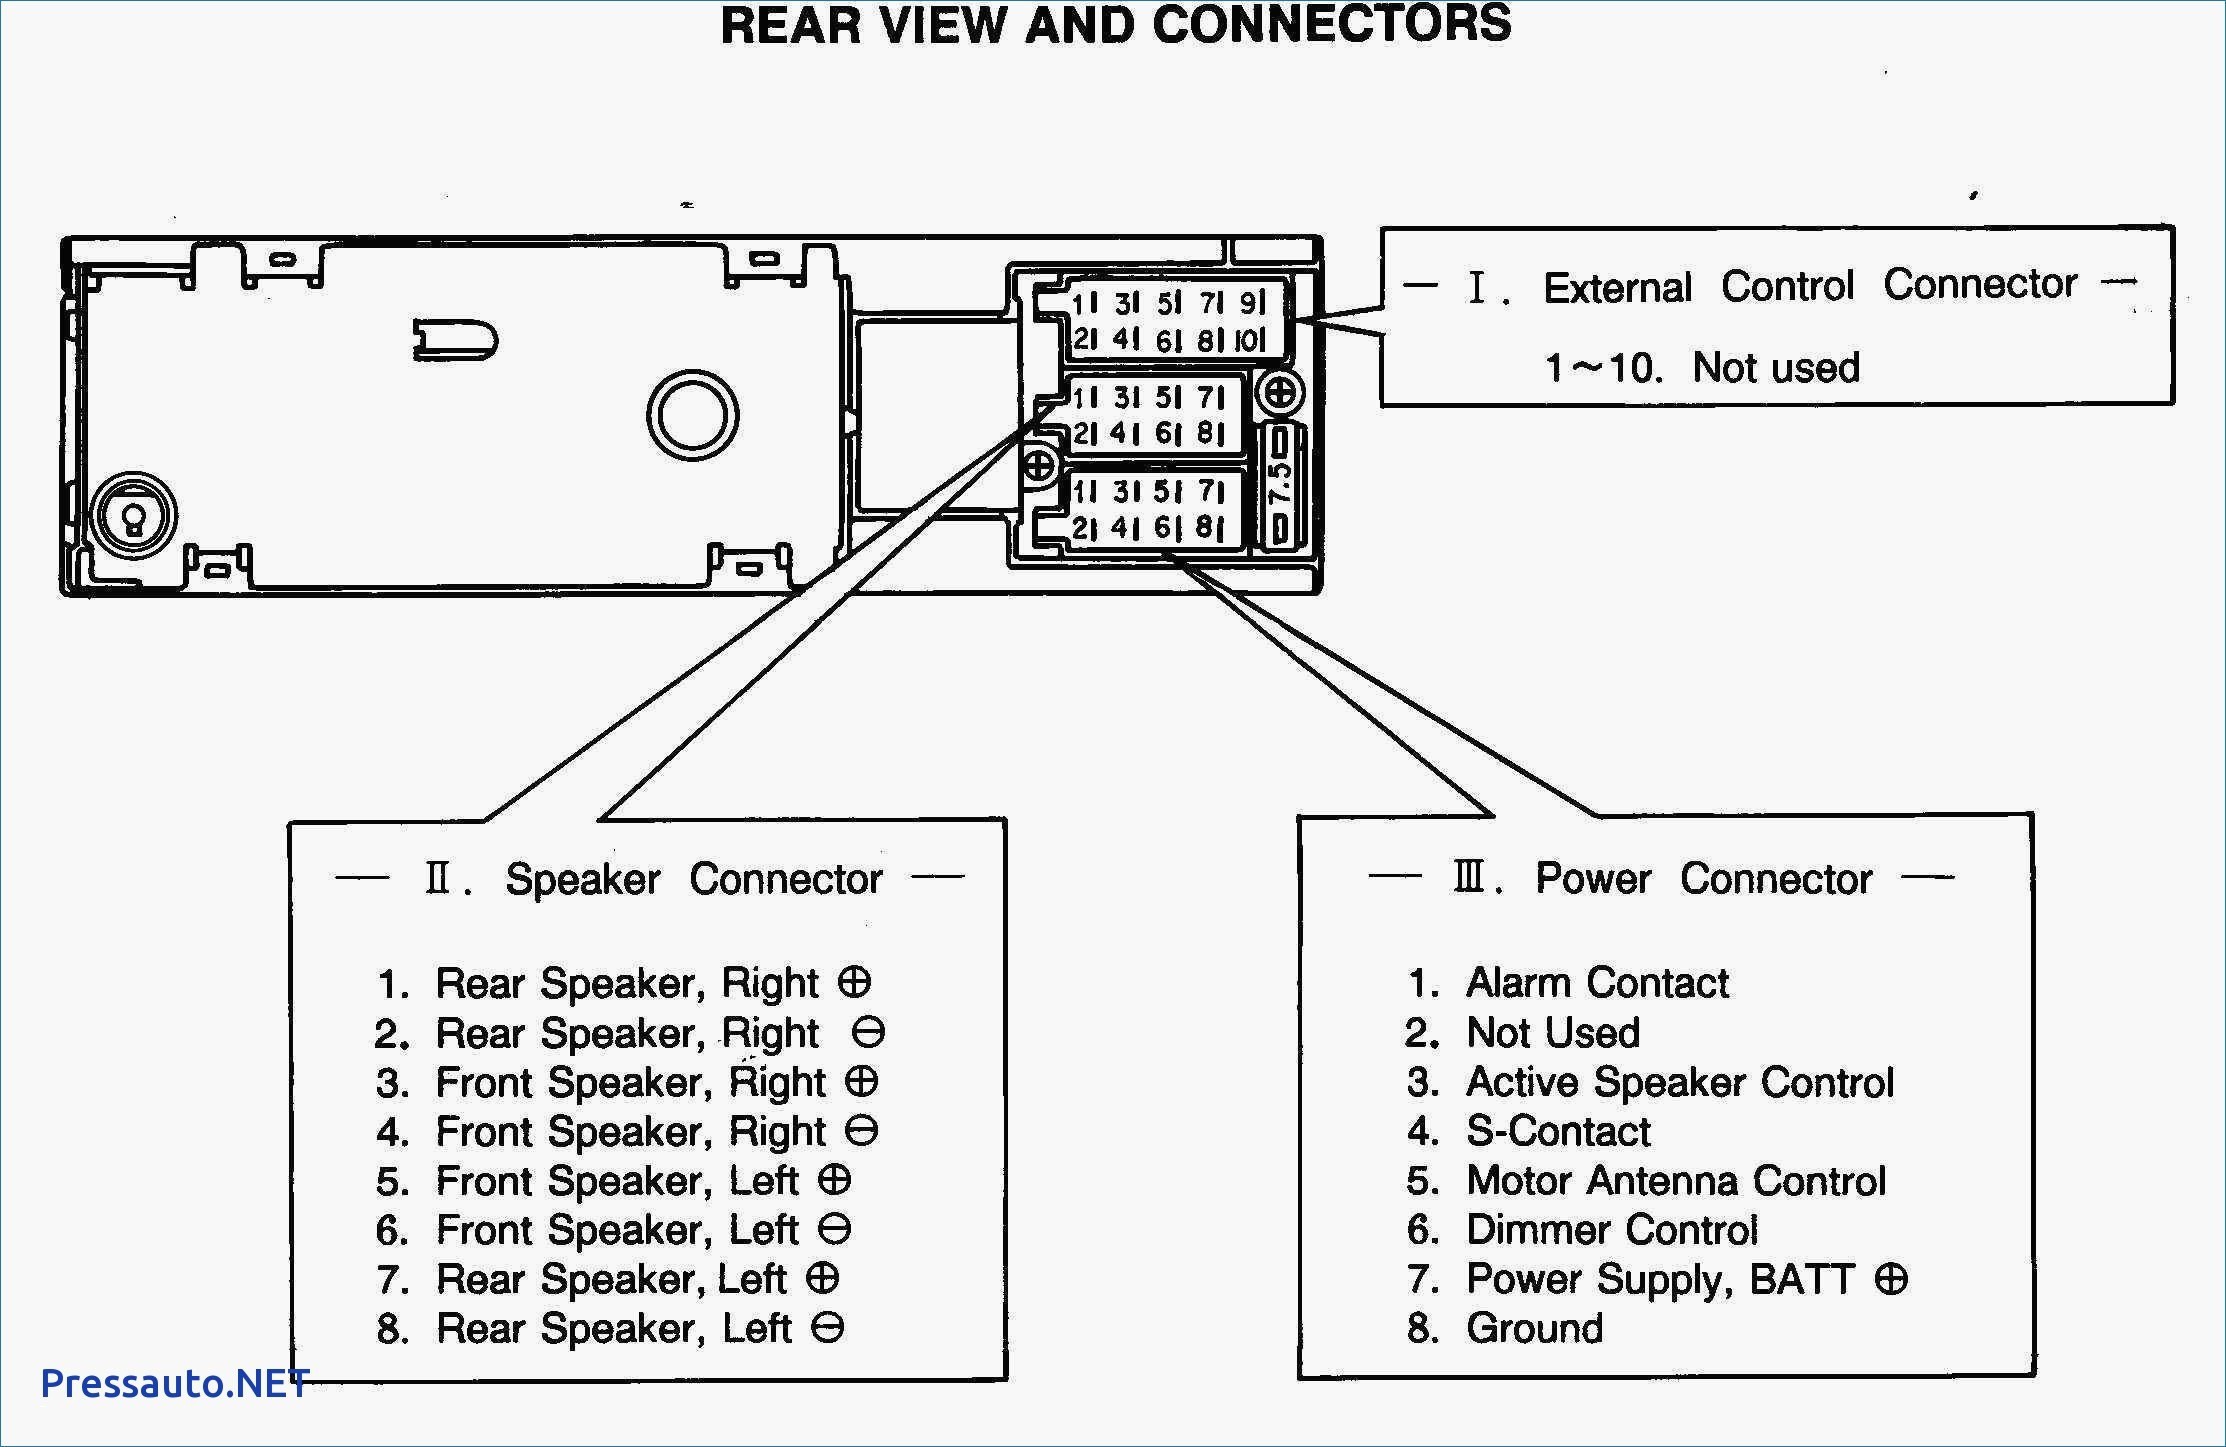 Clarion Car Radio Wiring Diagram Clarion Wiring Diagram for Car Stereo Refrence Speaker Wire Diagram Of Clarion Car Radio Wiring Diagram